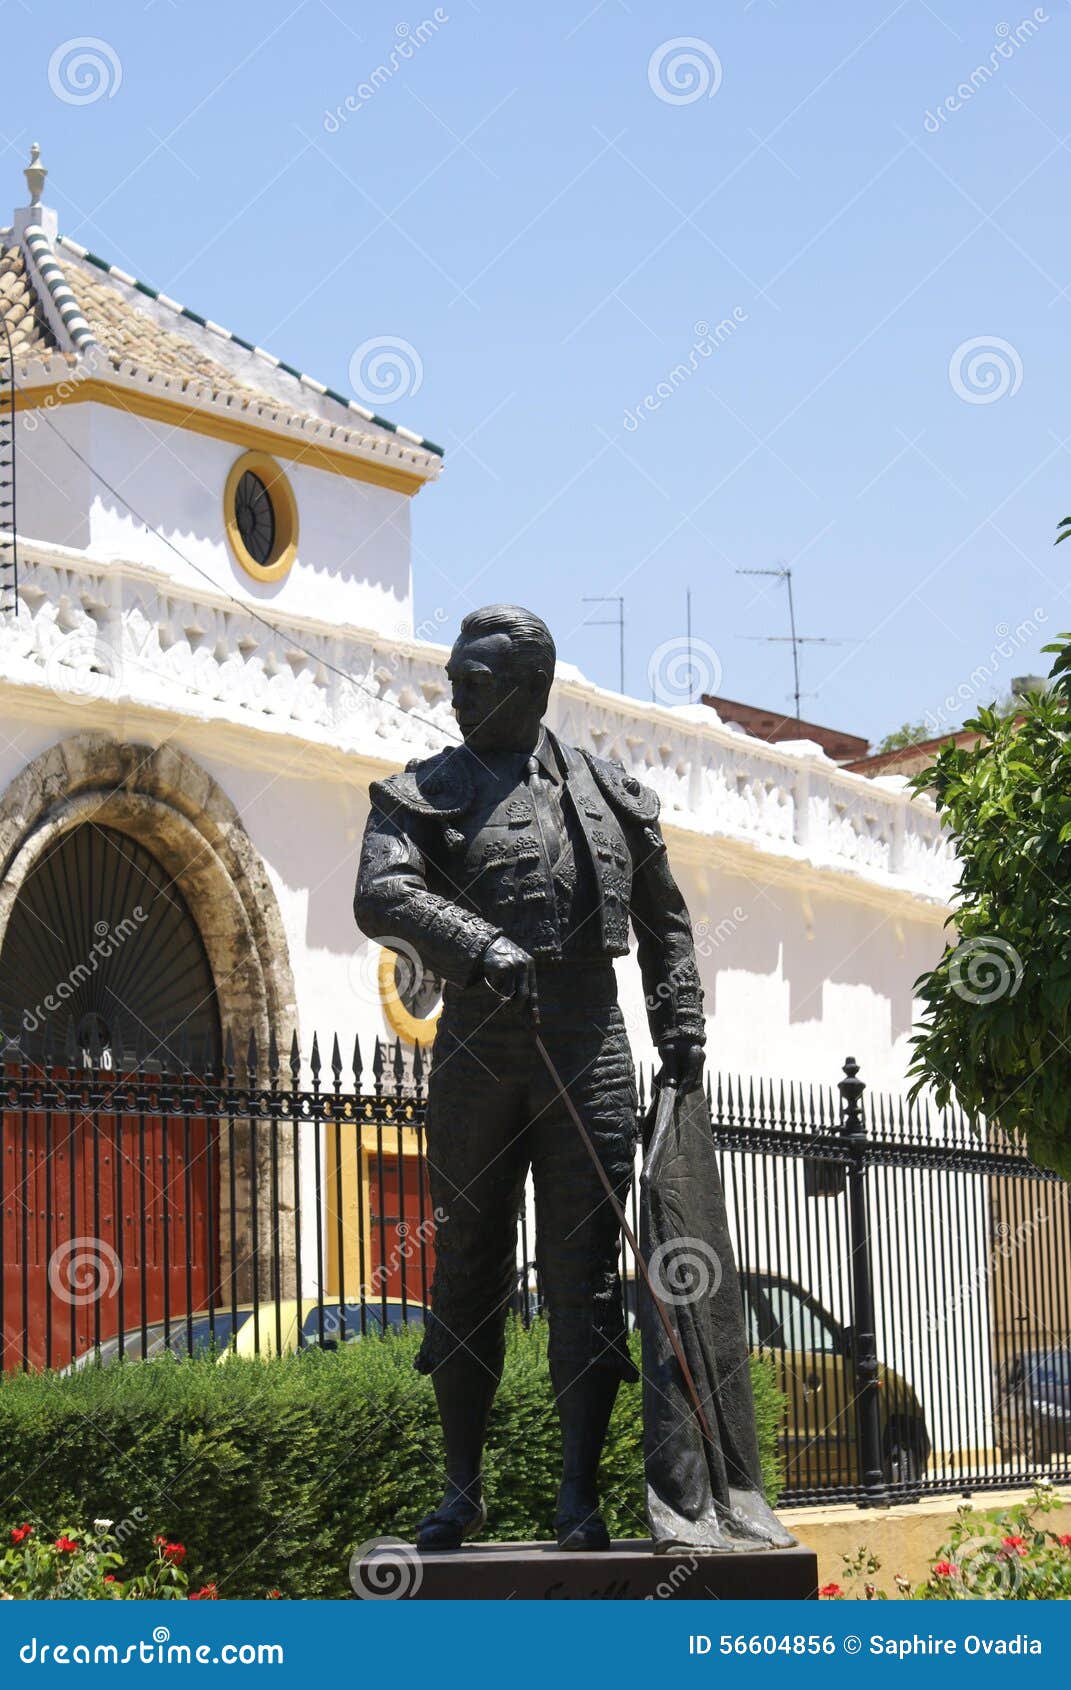 the monument of the bullfighter curro romero in seville, spain, europe